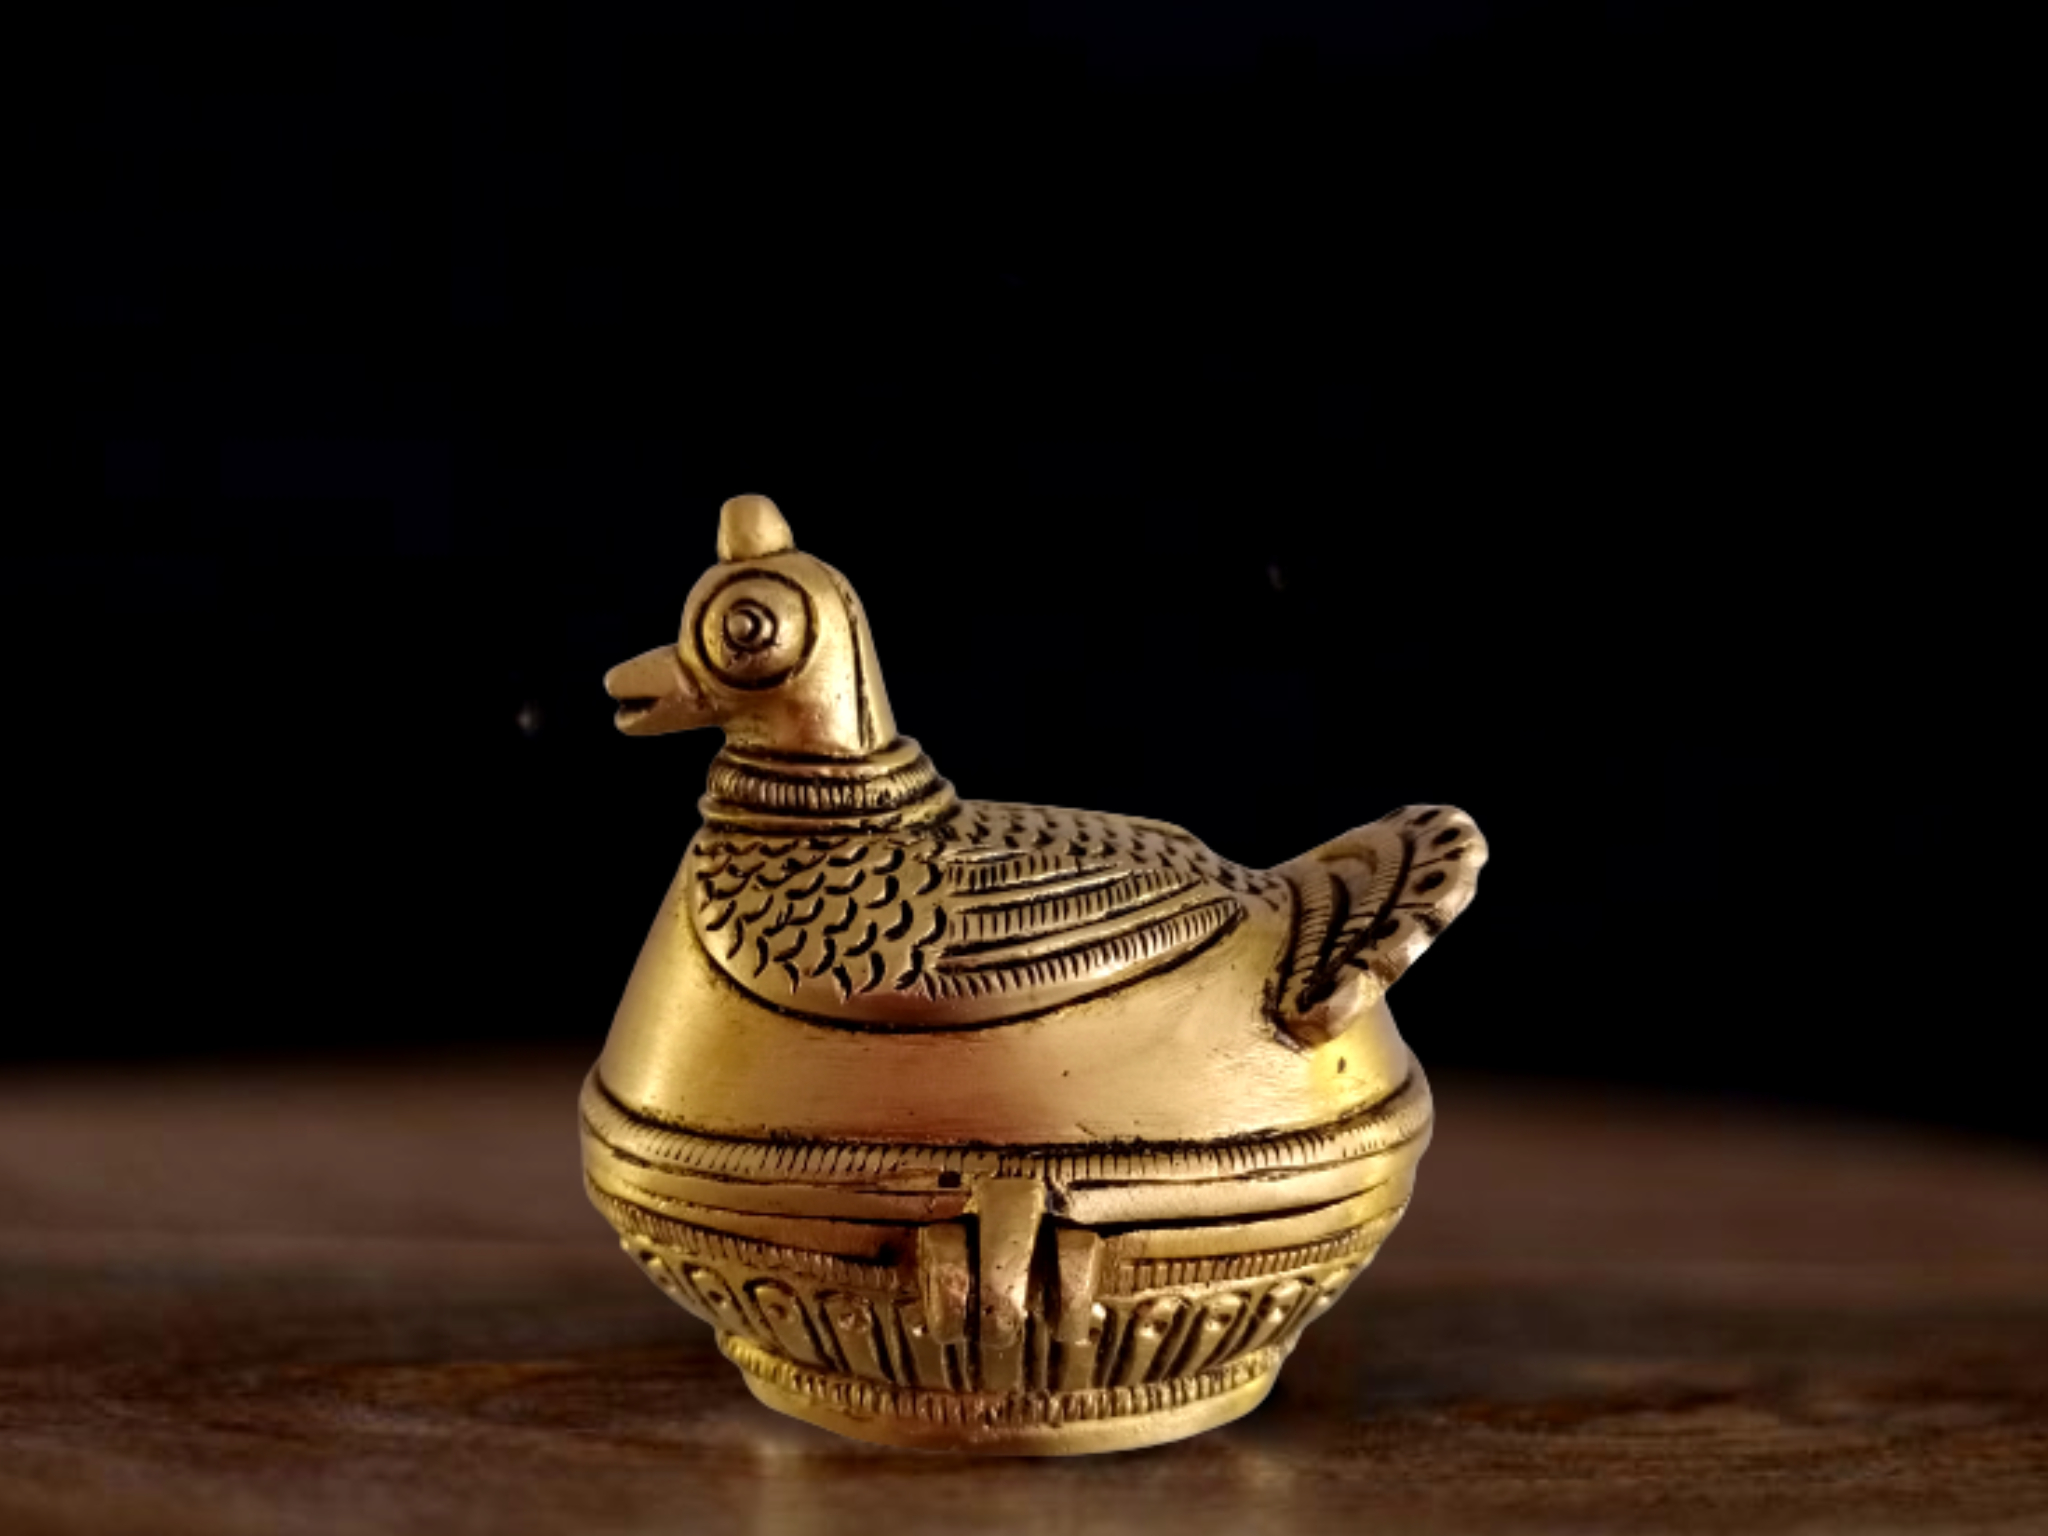 Brass Antique Collections, Home Decors, Gifts - Buy Online - Free Shippin - photo